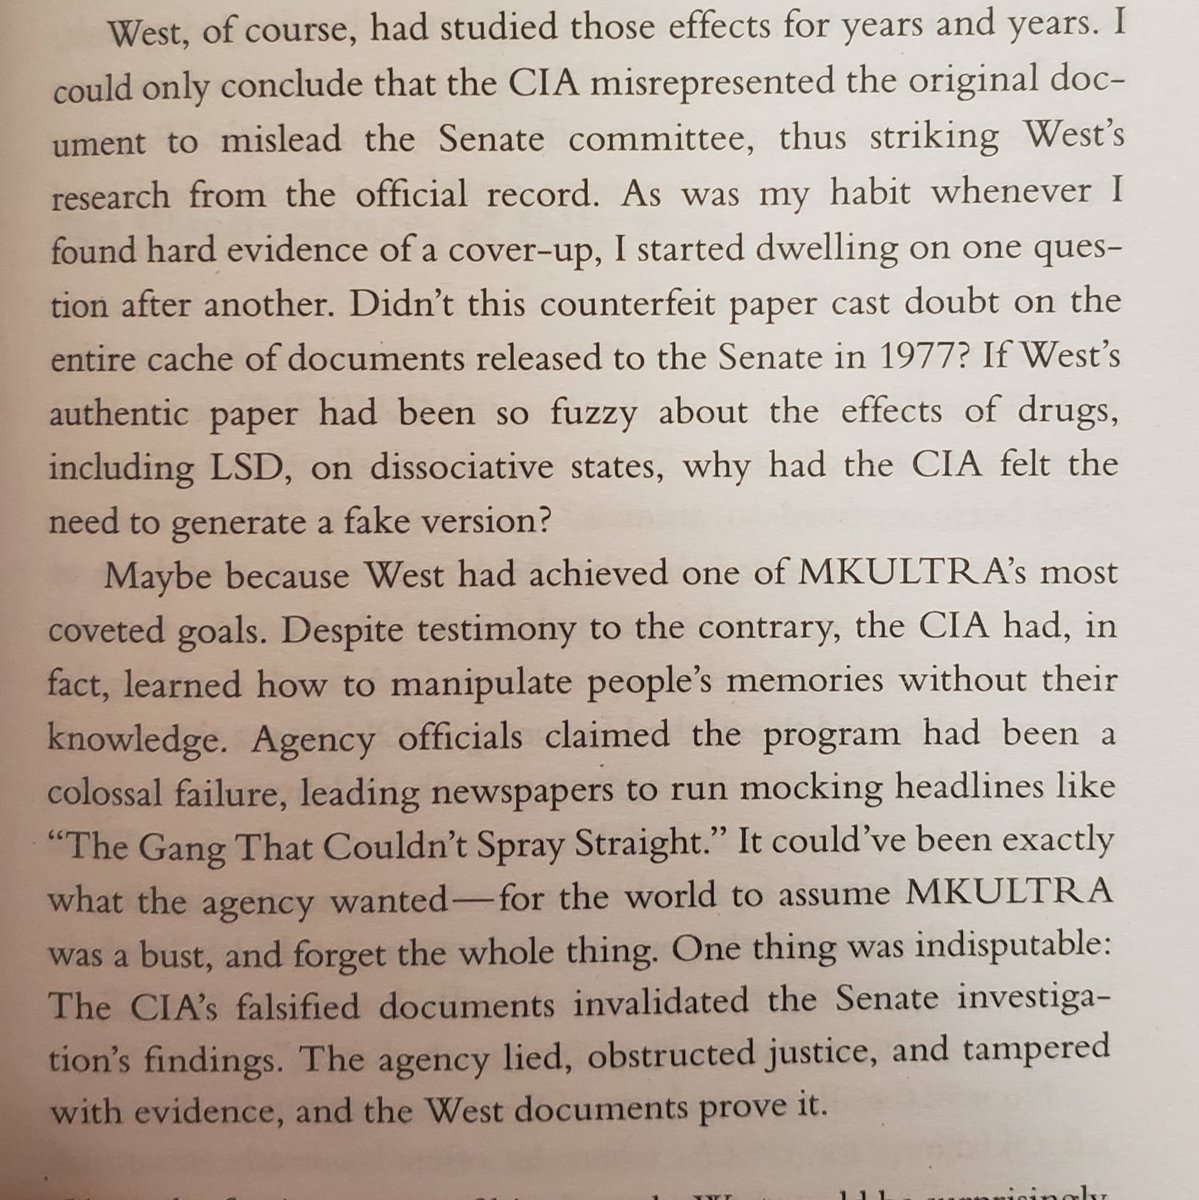 The official story is that MKULTRA was ultimately a waste, a colossal failure, the classic example of CIA overreach in the midst of Cold War hysteria. But what if the opposite is true? The program ran for 25 years. What if they succeeded?